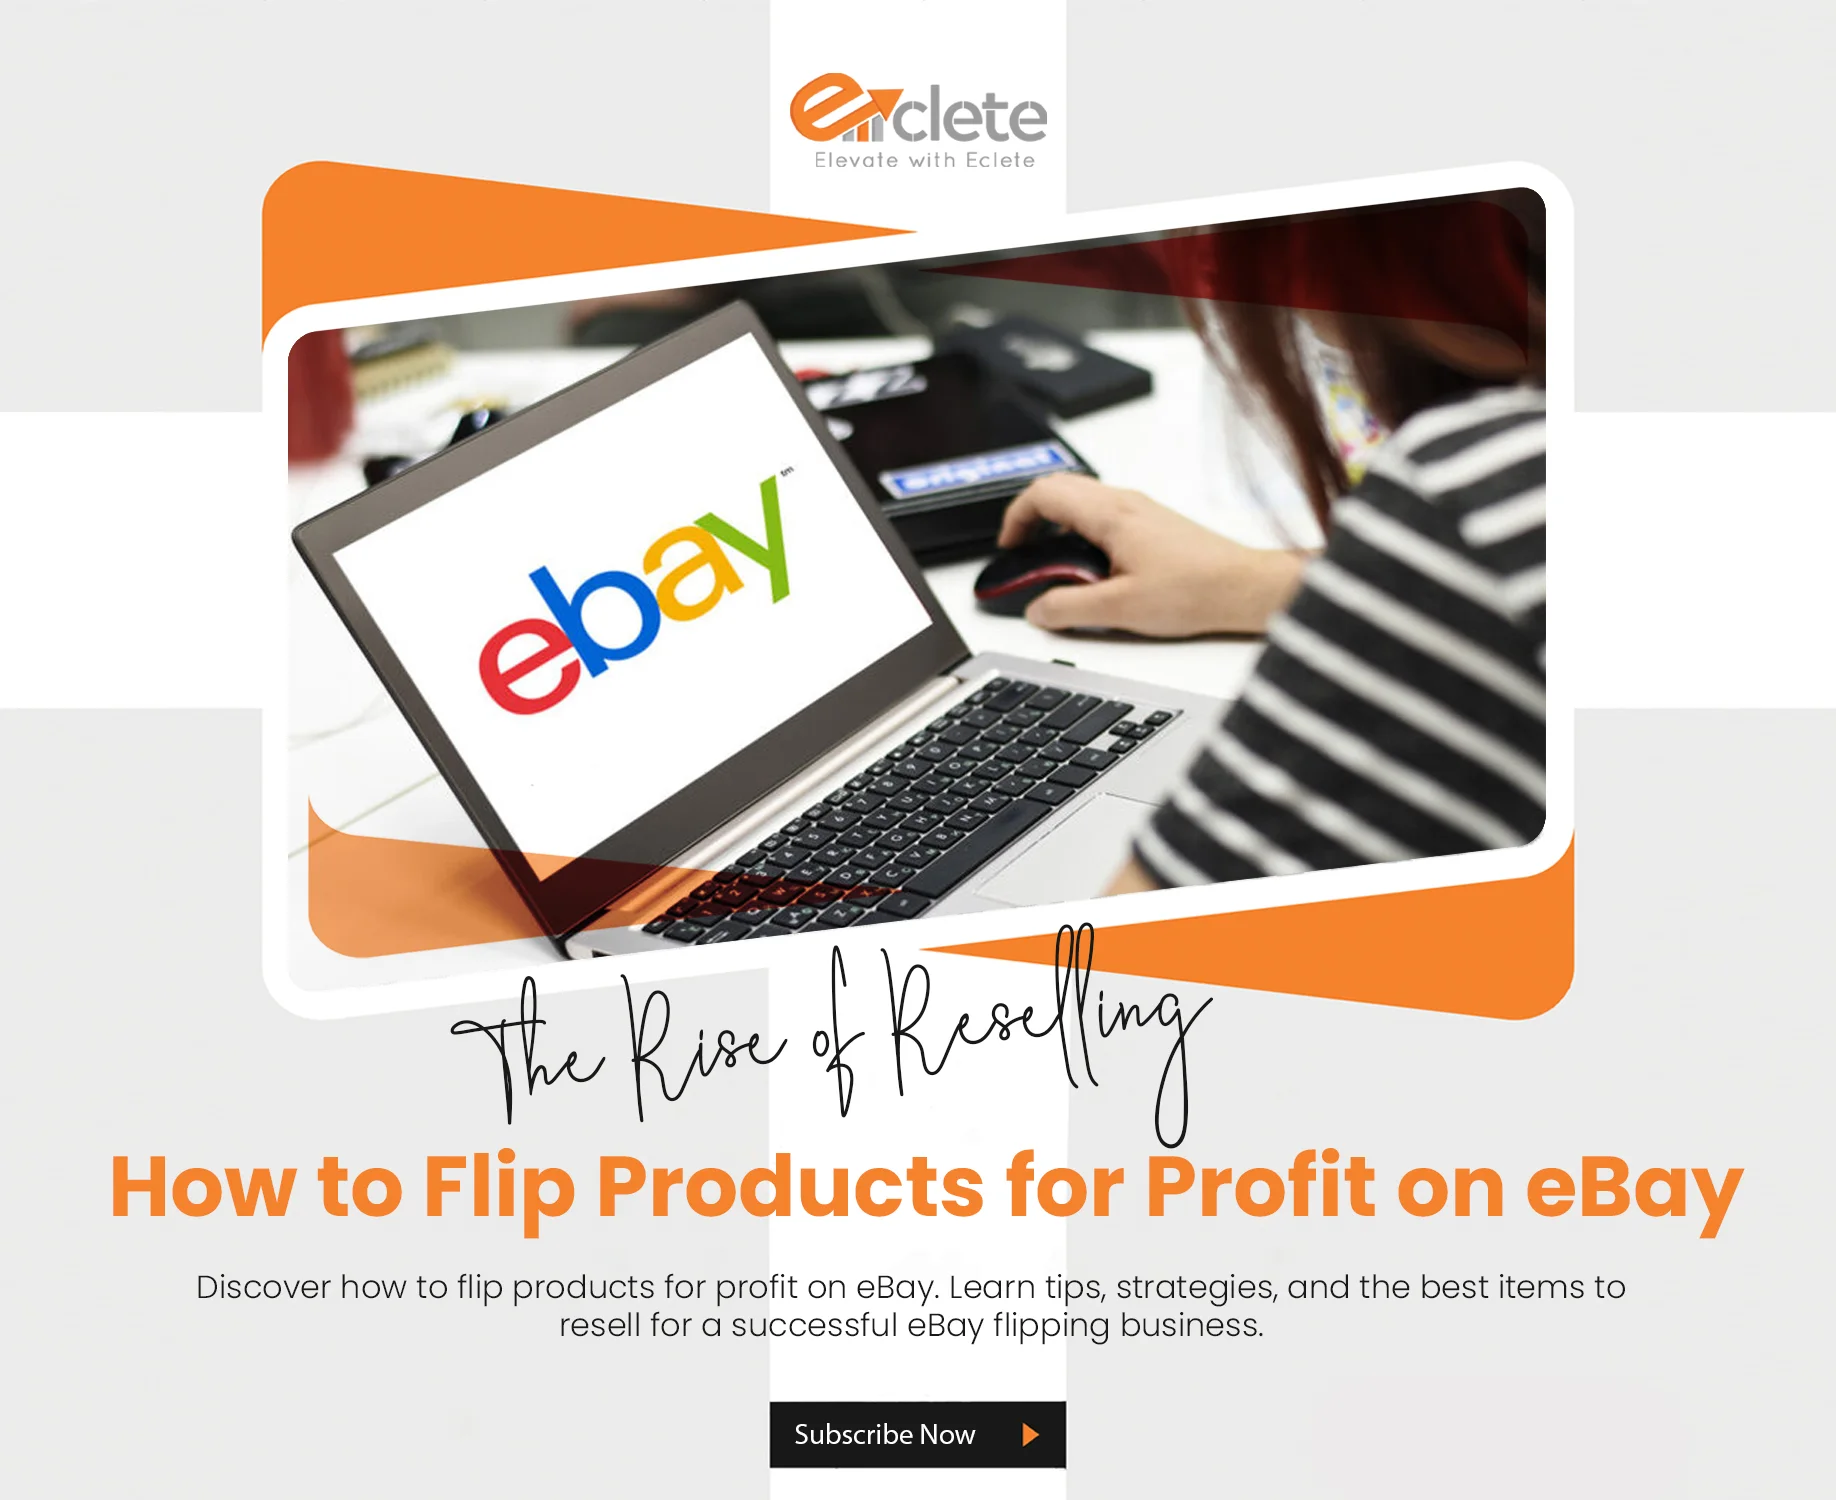 The Rise of Reselling: How to Flip Products for Profit on eBay